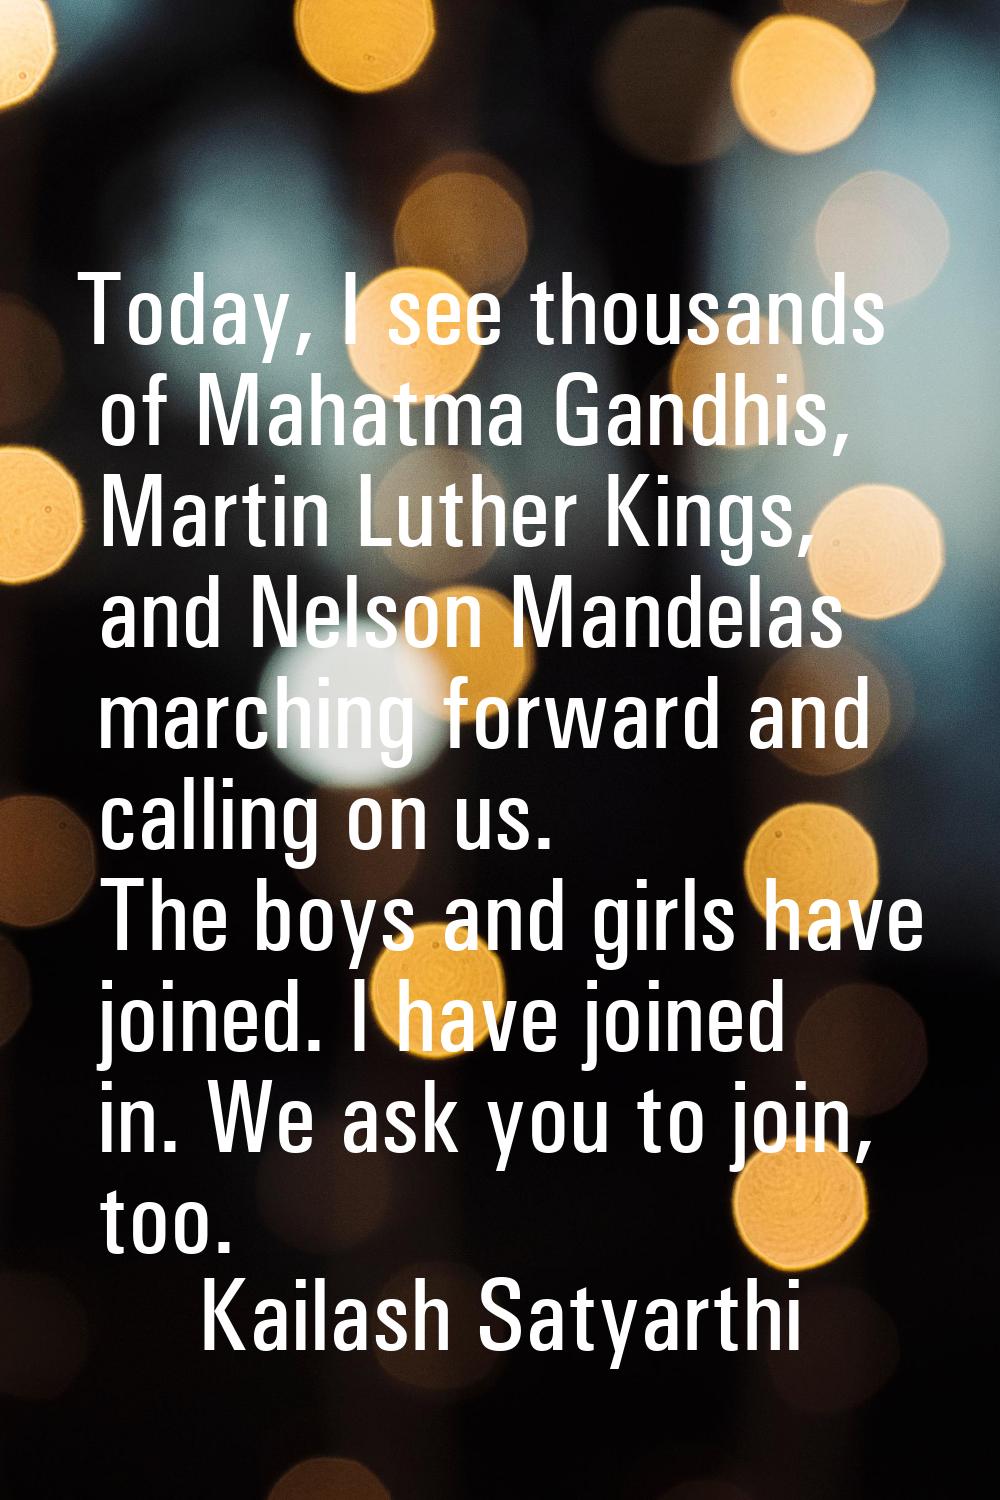 Today, I see thousands of Mahatma Gandhis, Martin Luther Kings, and Nelson Mandelas marching forwar